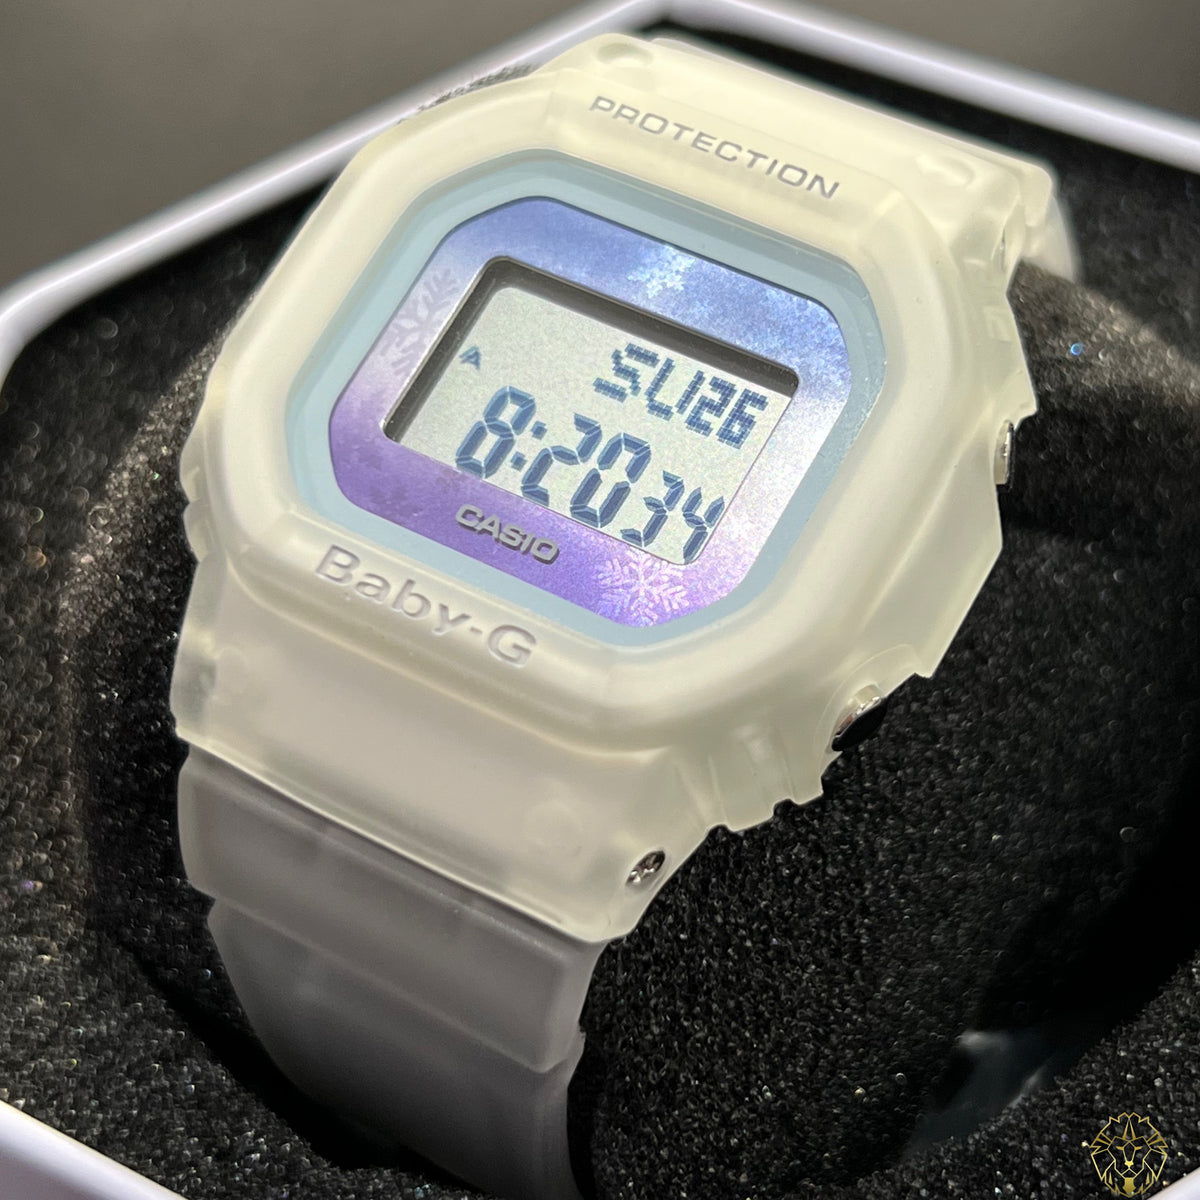 Casio Baby-G Frosted Blanco (Damas) - Elite Jewelry Store 